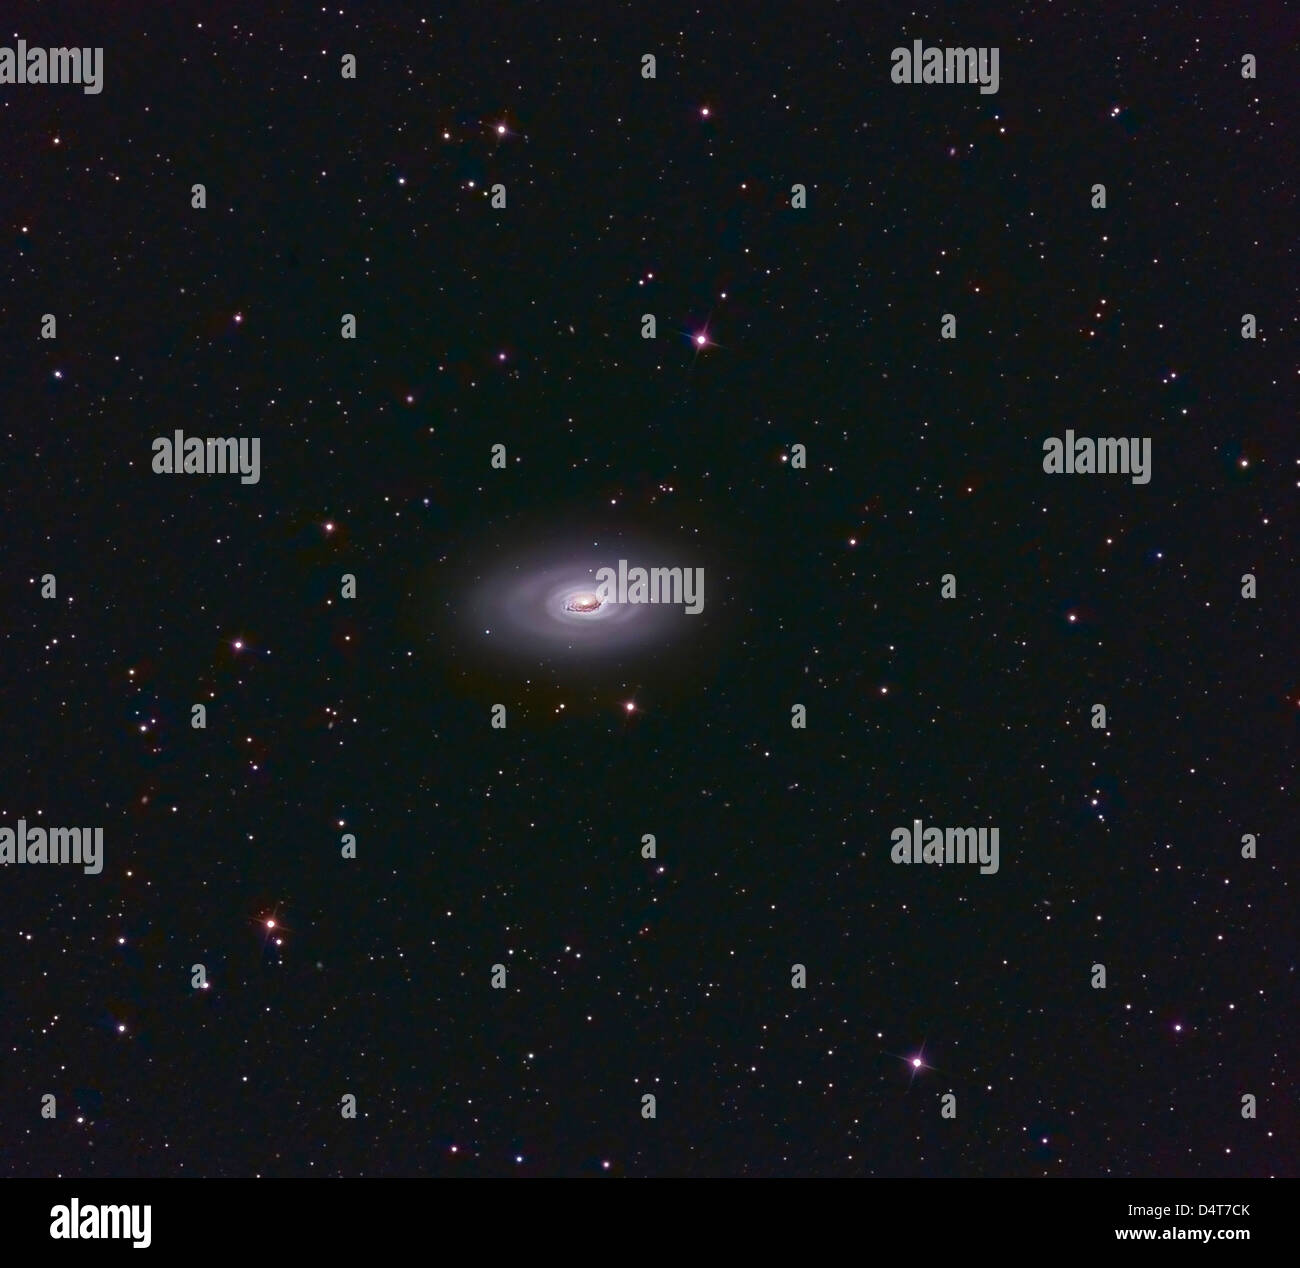 The Black Eye Galaxy - Facts & Features - The Planets